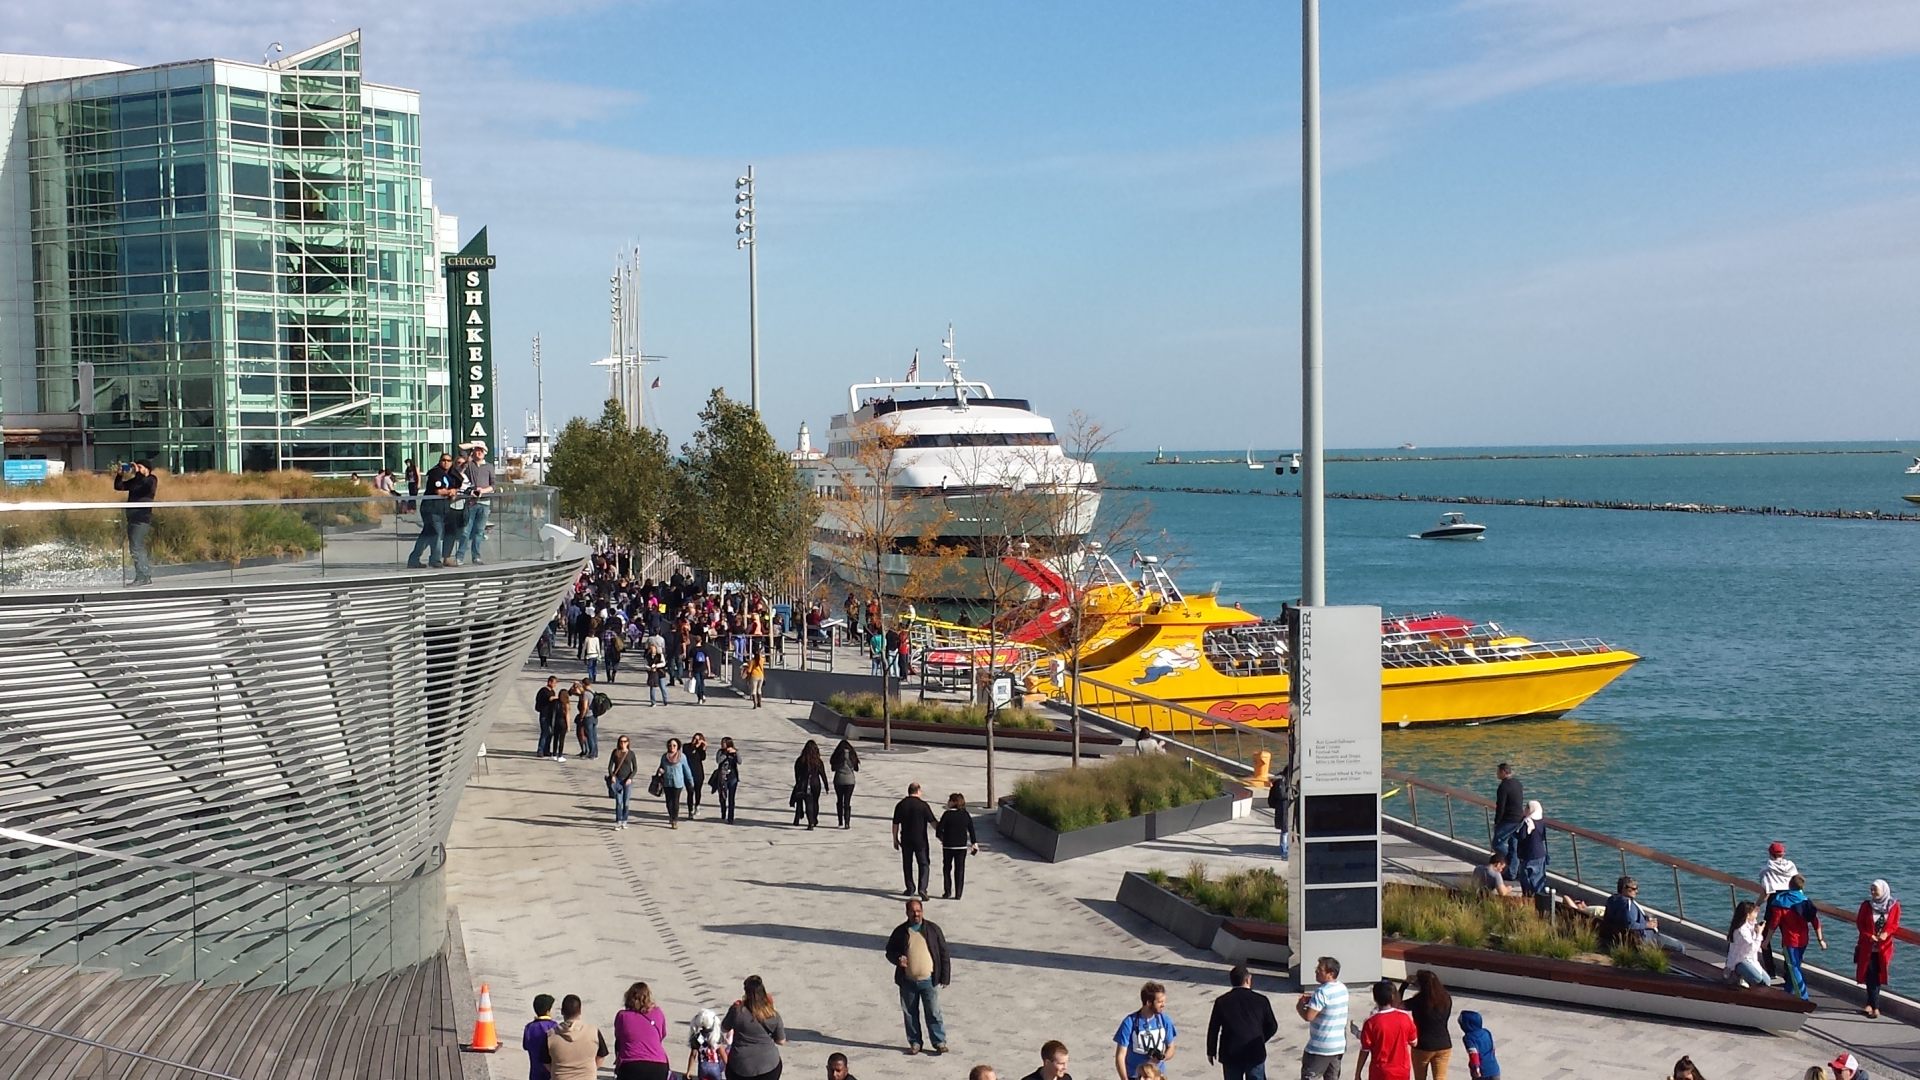 Official Guide to Navy Pier, Events, Tours, Attractions in Chicago